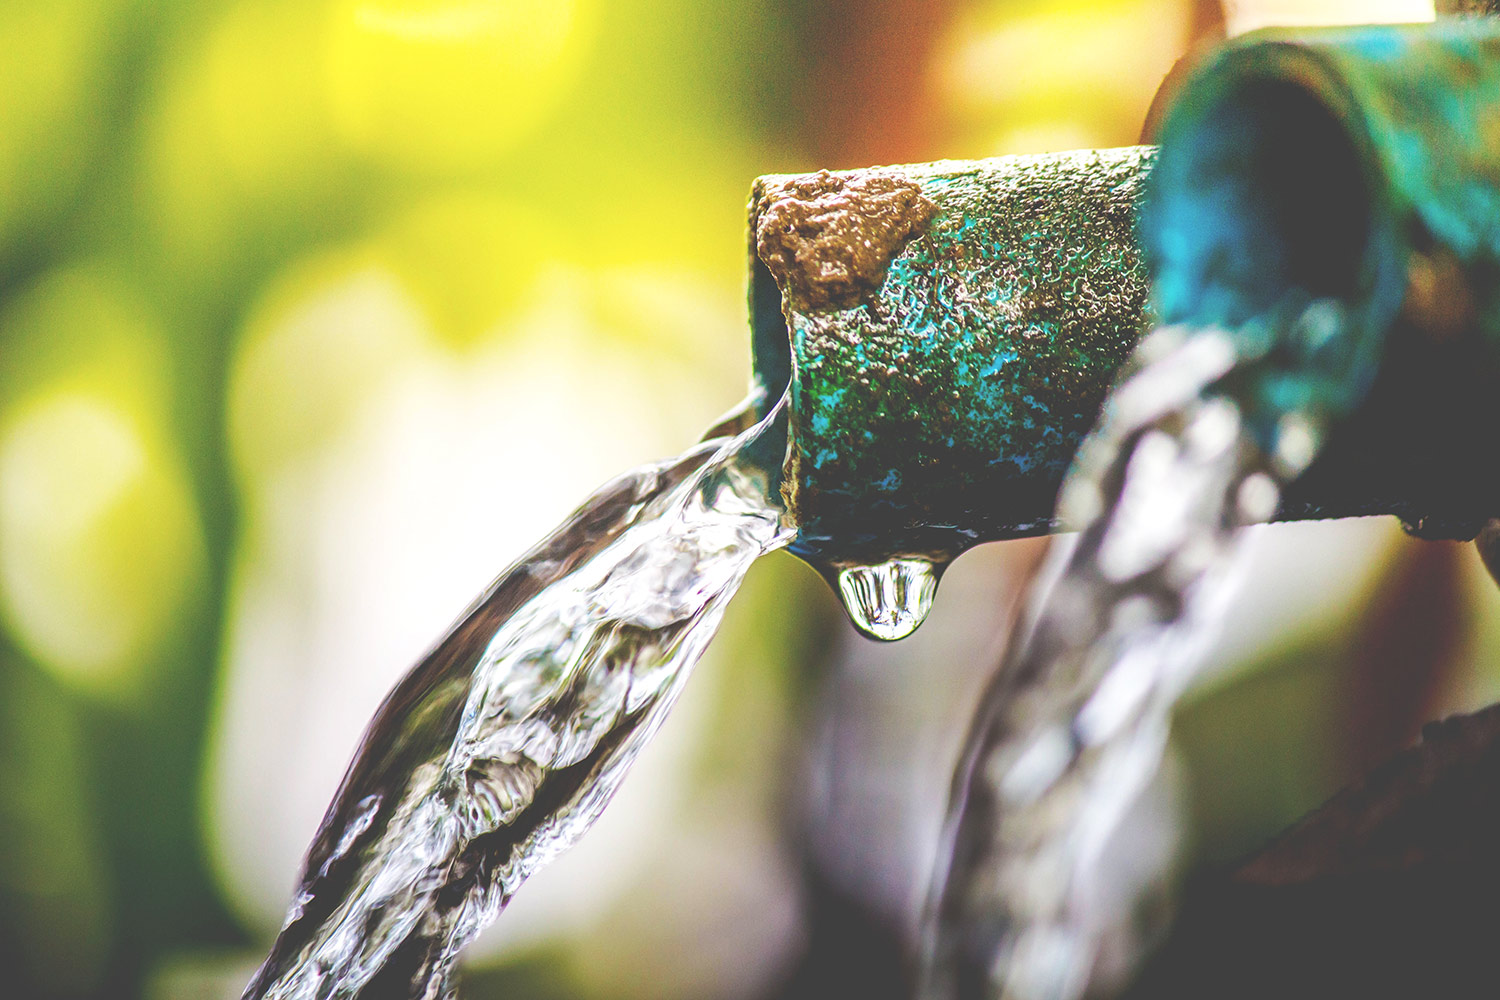 Water going out of rusty taps on blurry green forest background